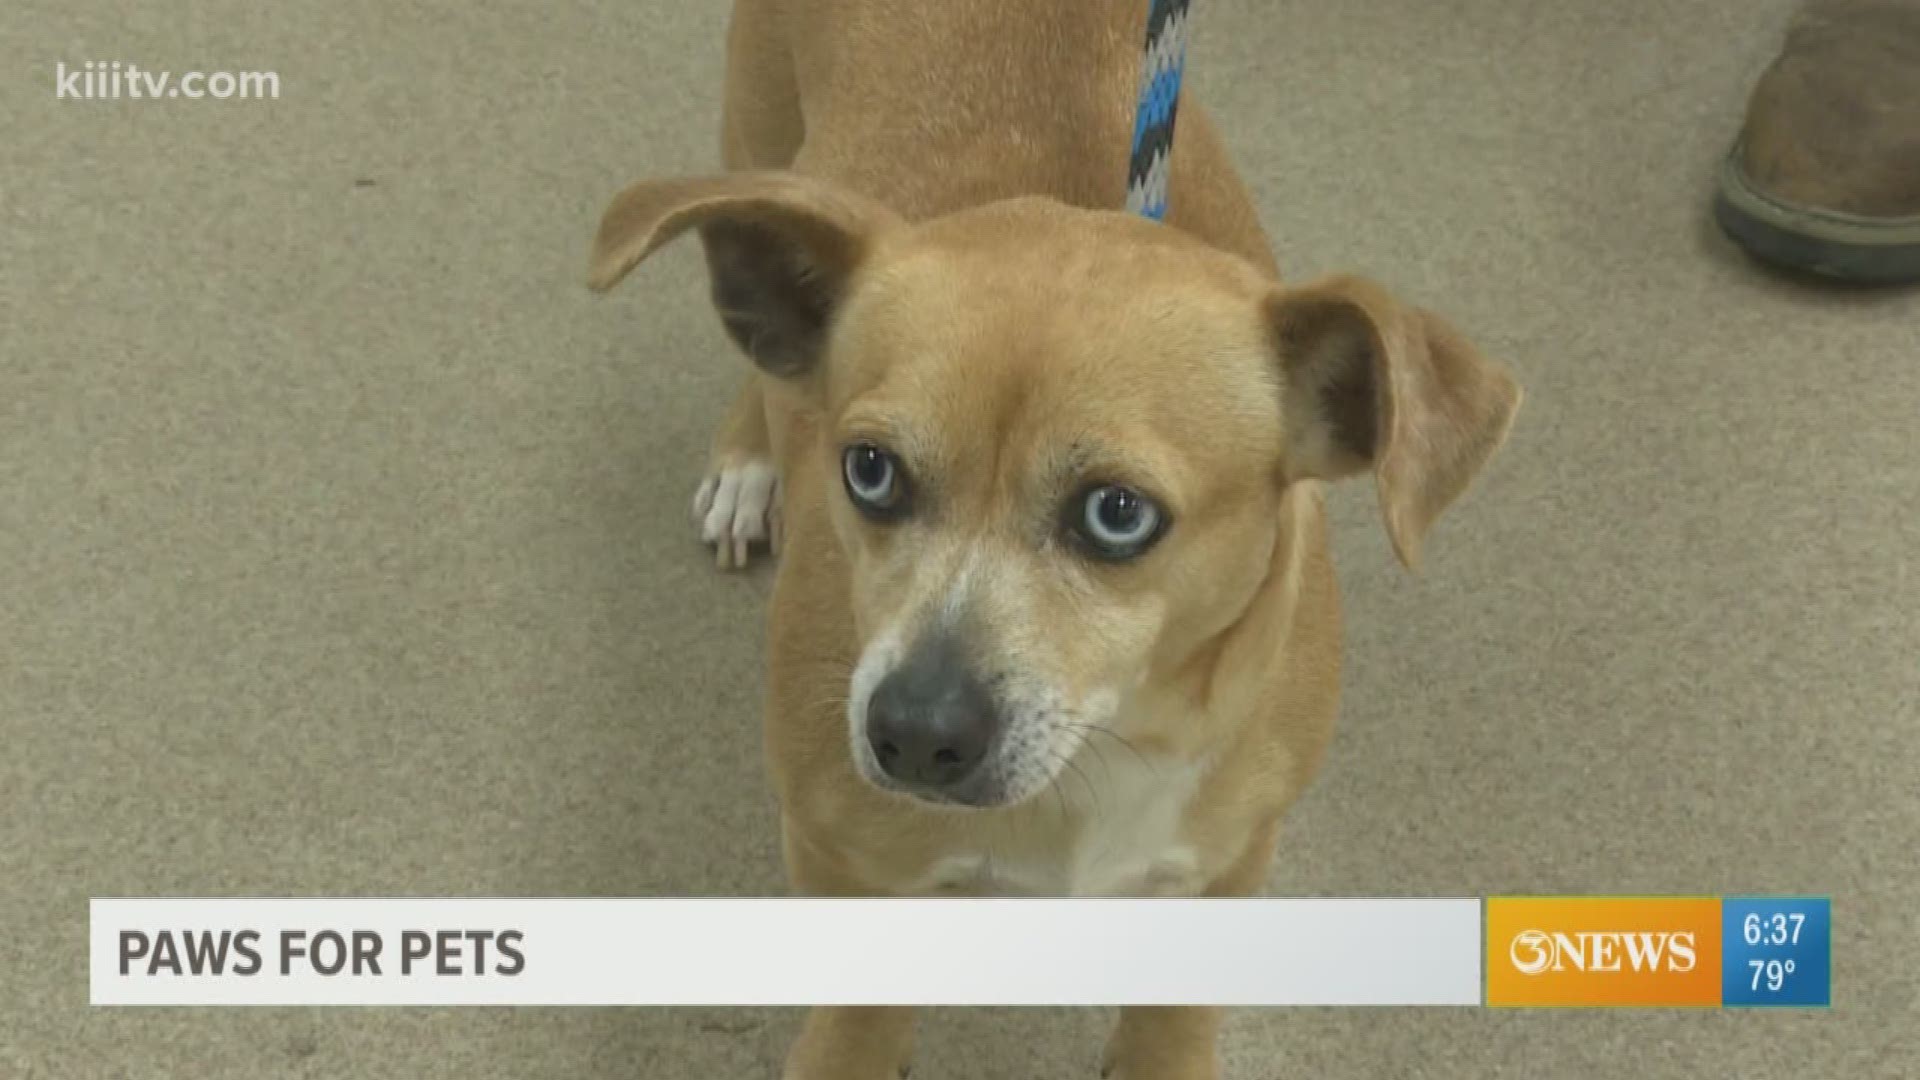 Adopt your next pet from the Gulf Coast Humane Society.